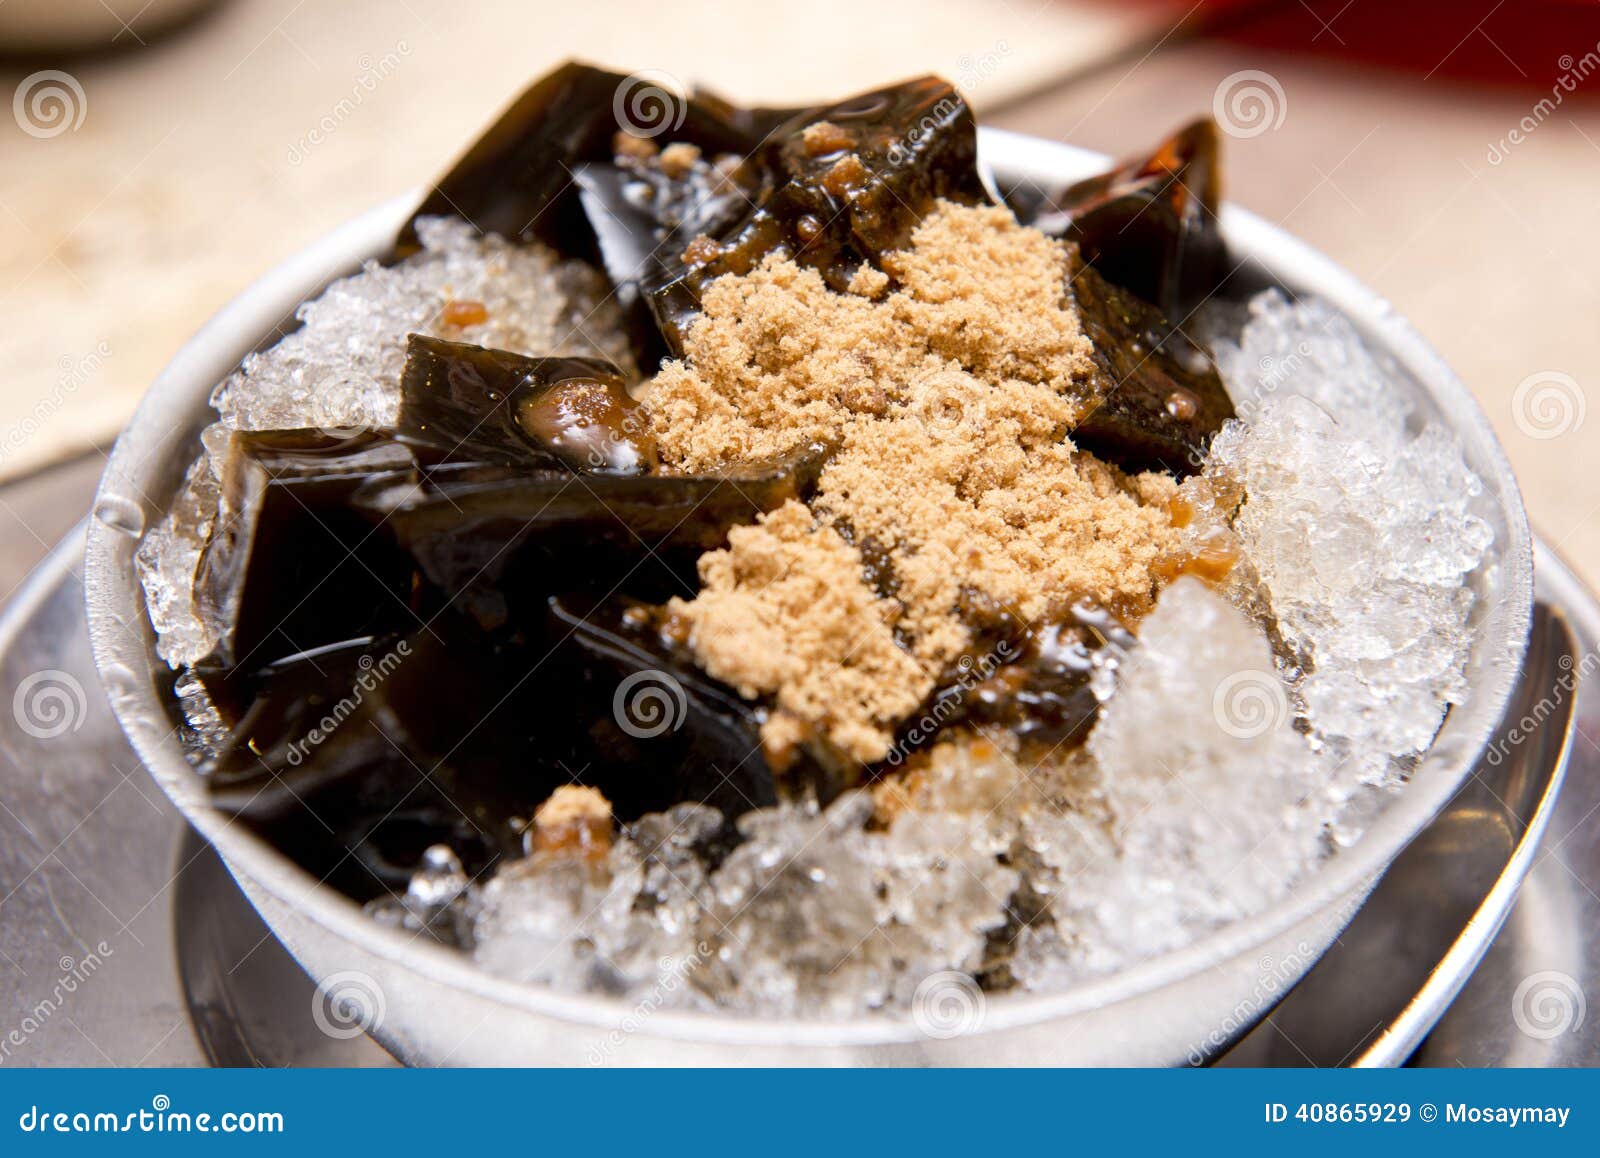 Photo Ice grass jelly recipe Fresh and Delicious Bontang